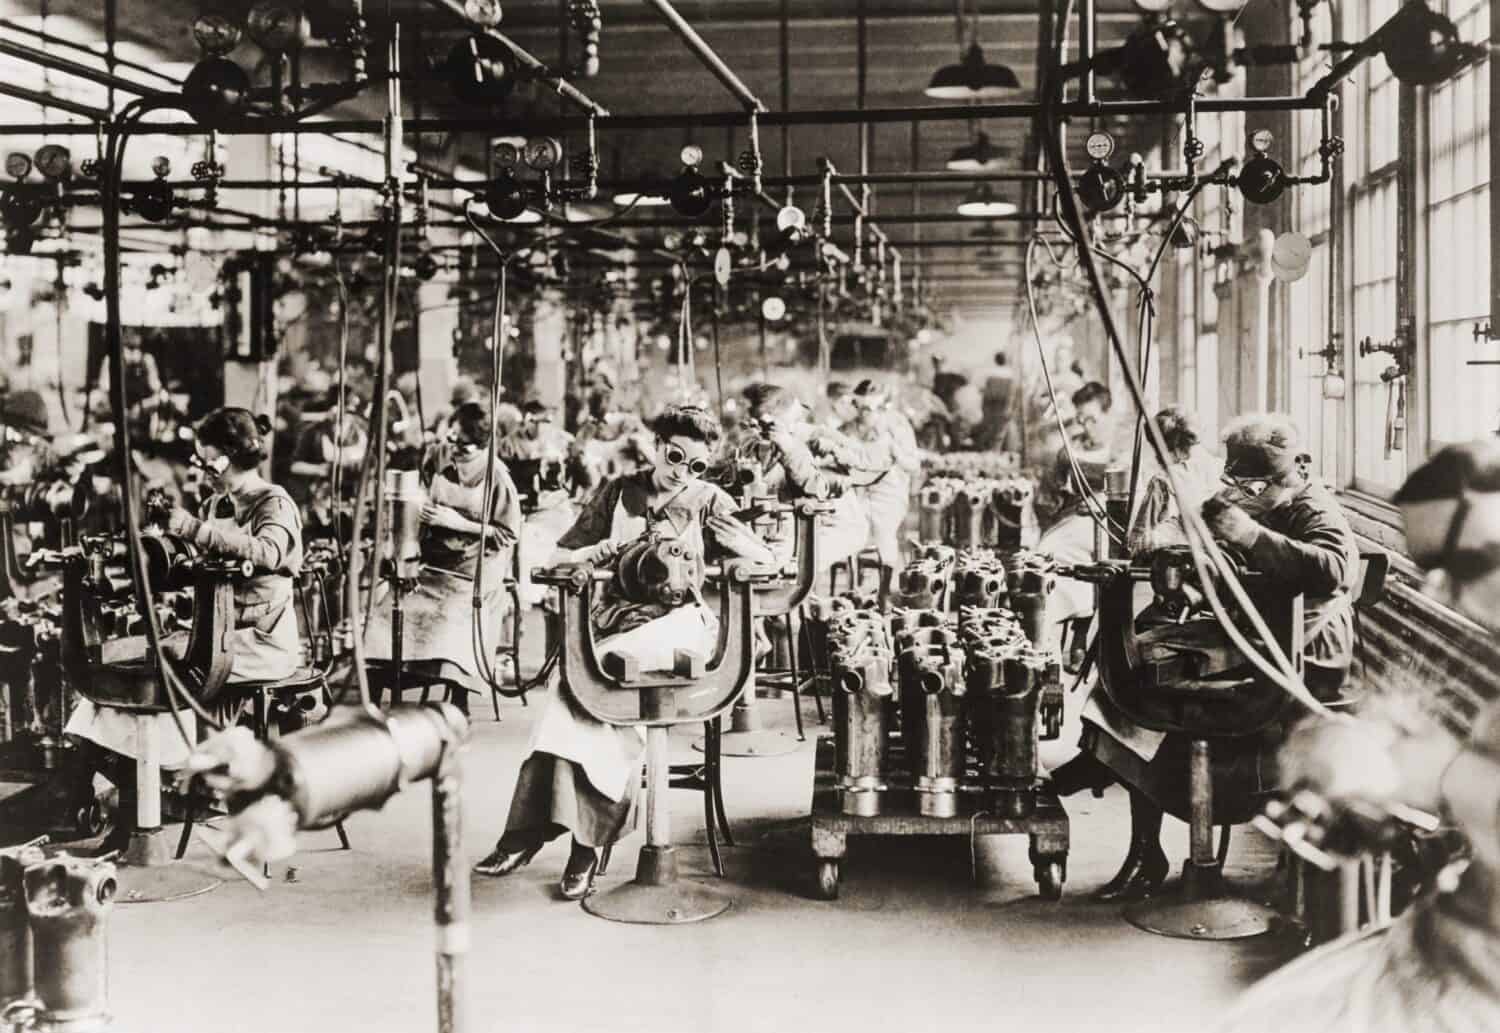 Women working in Welding Department, Lincoln Motor Company in Detroit, Michigan during World War I.